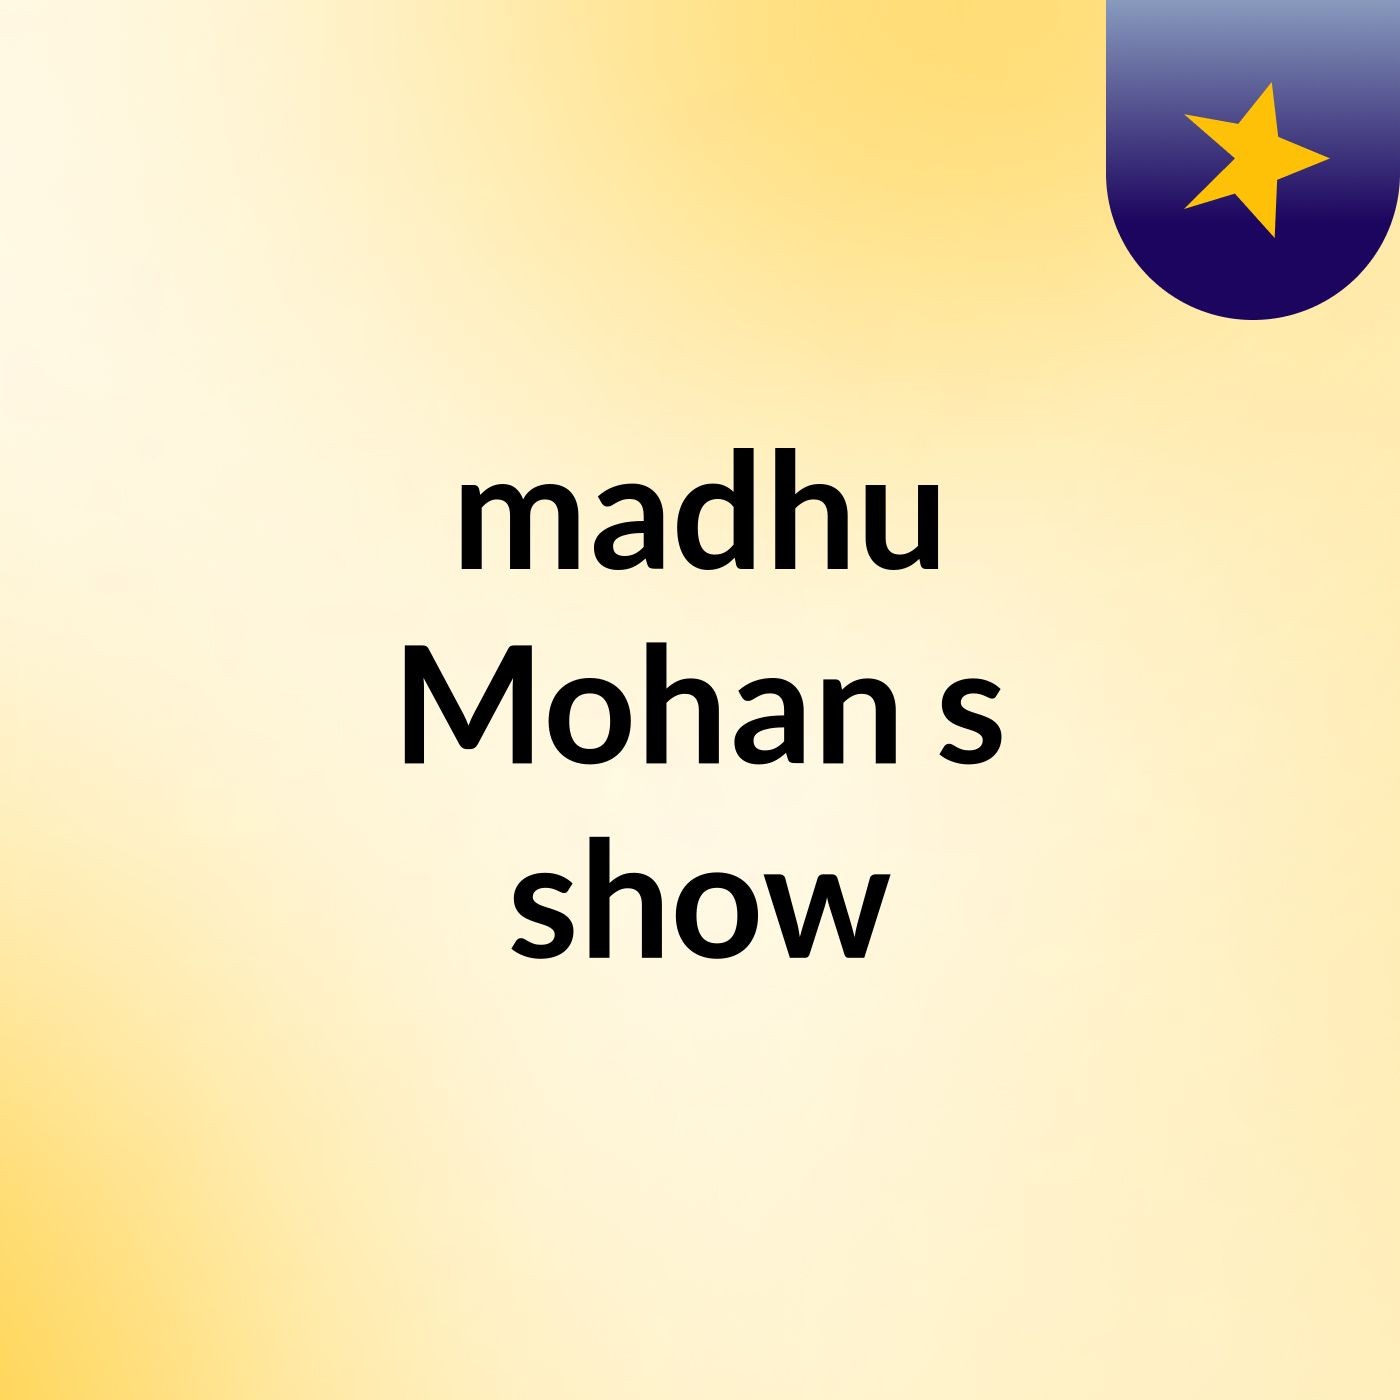 Episode 24 - madhu Mohan's show